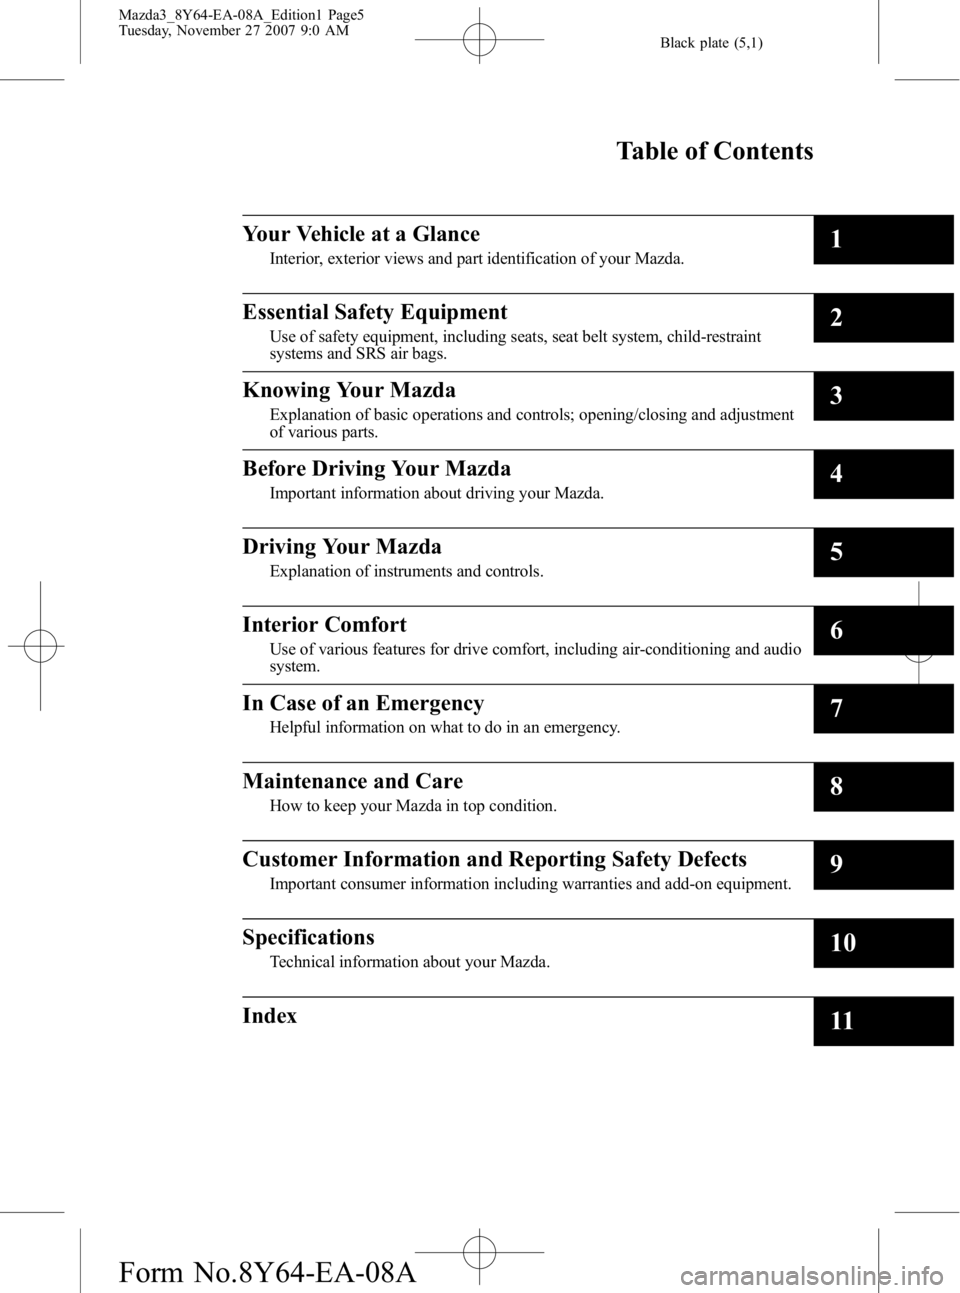 MAZDA MODEL 3 5-DOOR 2008  Owners Manual Black plate (5,1)
Mazda3_8Y64-EA-08A_Edition1 Page5
Tuesday, November 27 2007 9:0 AM
Form No.8Y64-EA-08A
Table of Contents
Your Vehicle at a Glance
Interior, exterior views and part identification of 